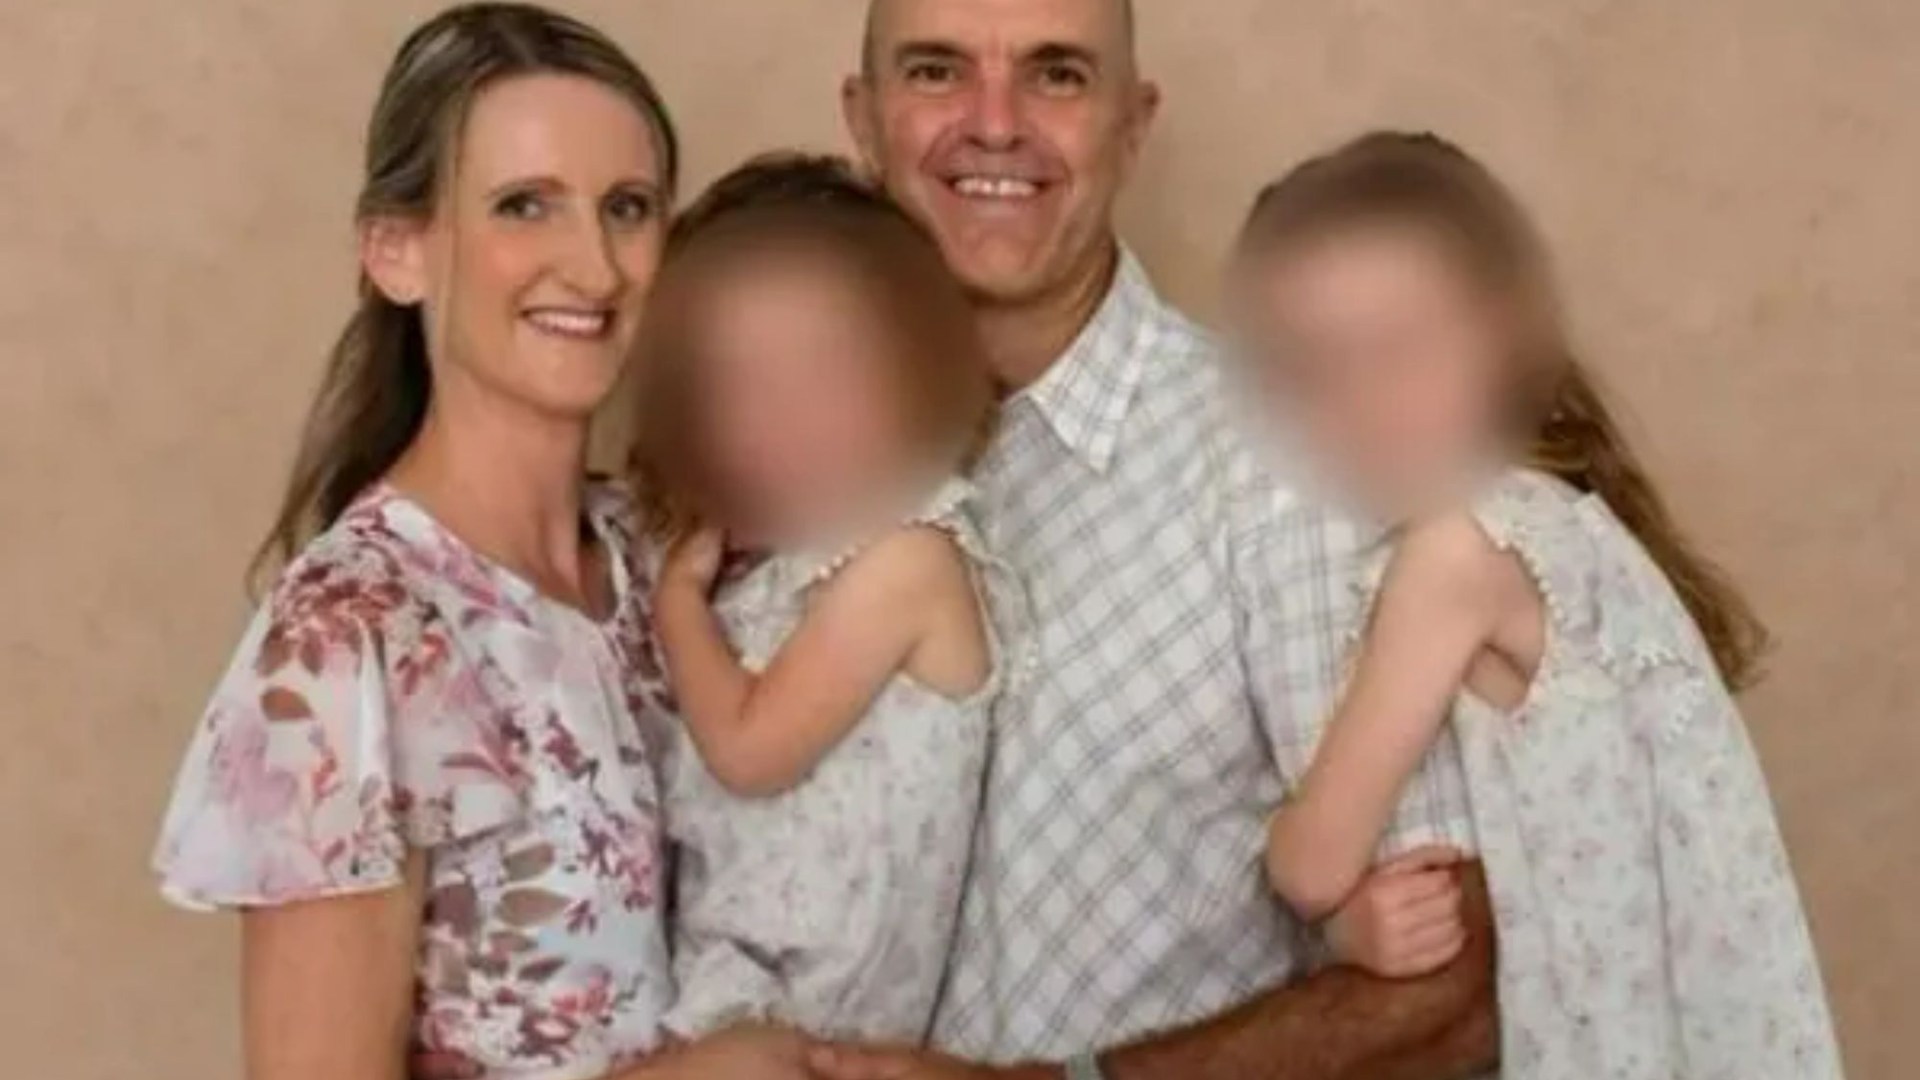 Tragedy as parents of two young girls aged 4 and 8 die from cancer just 7 days apart [Video]